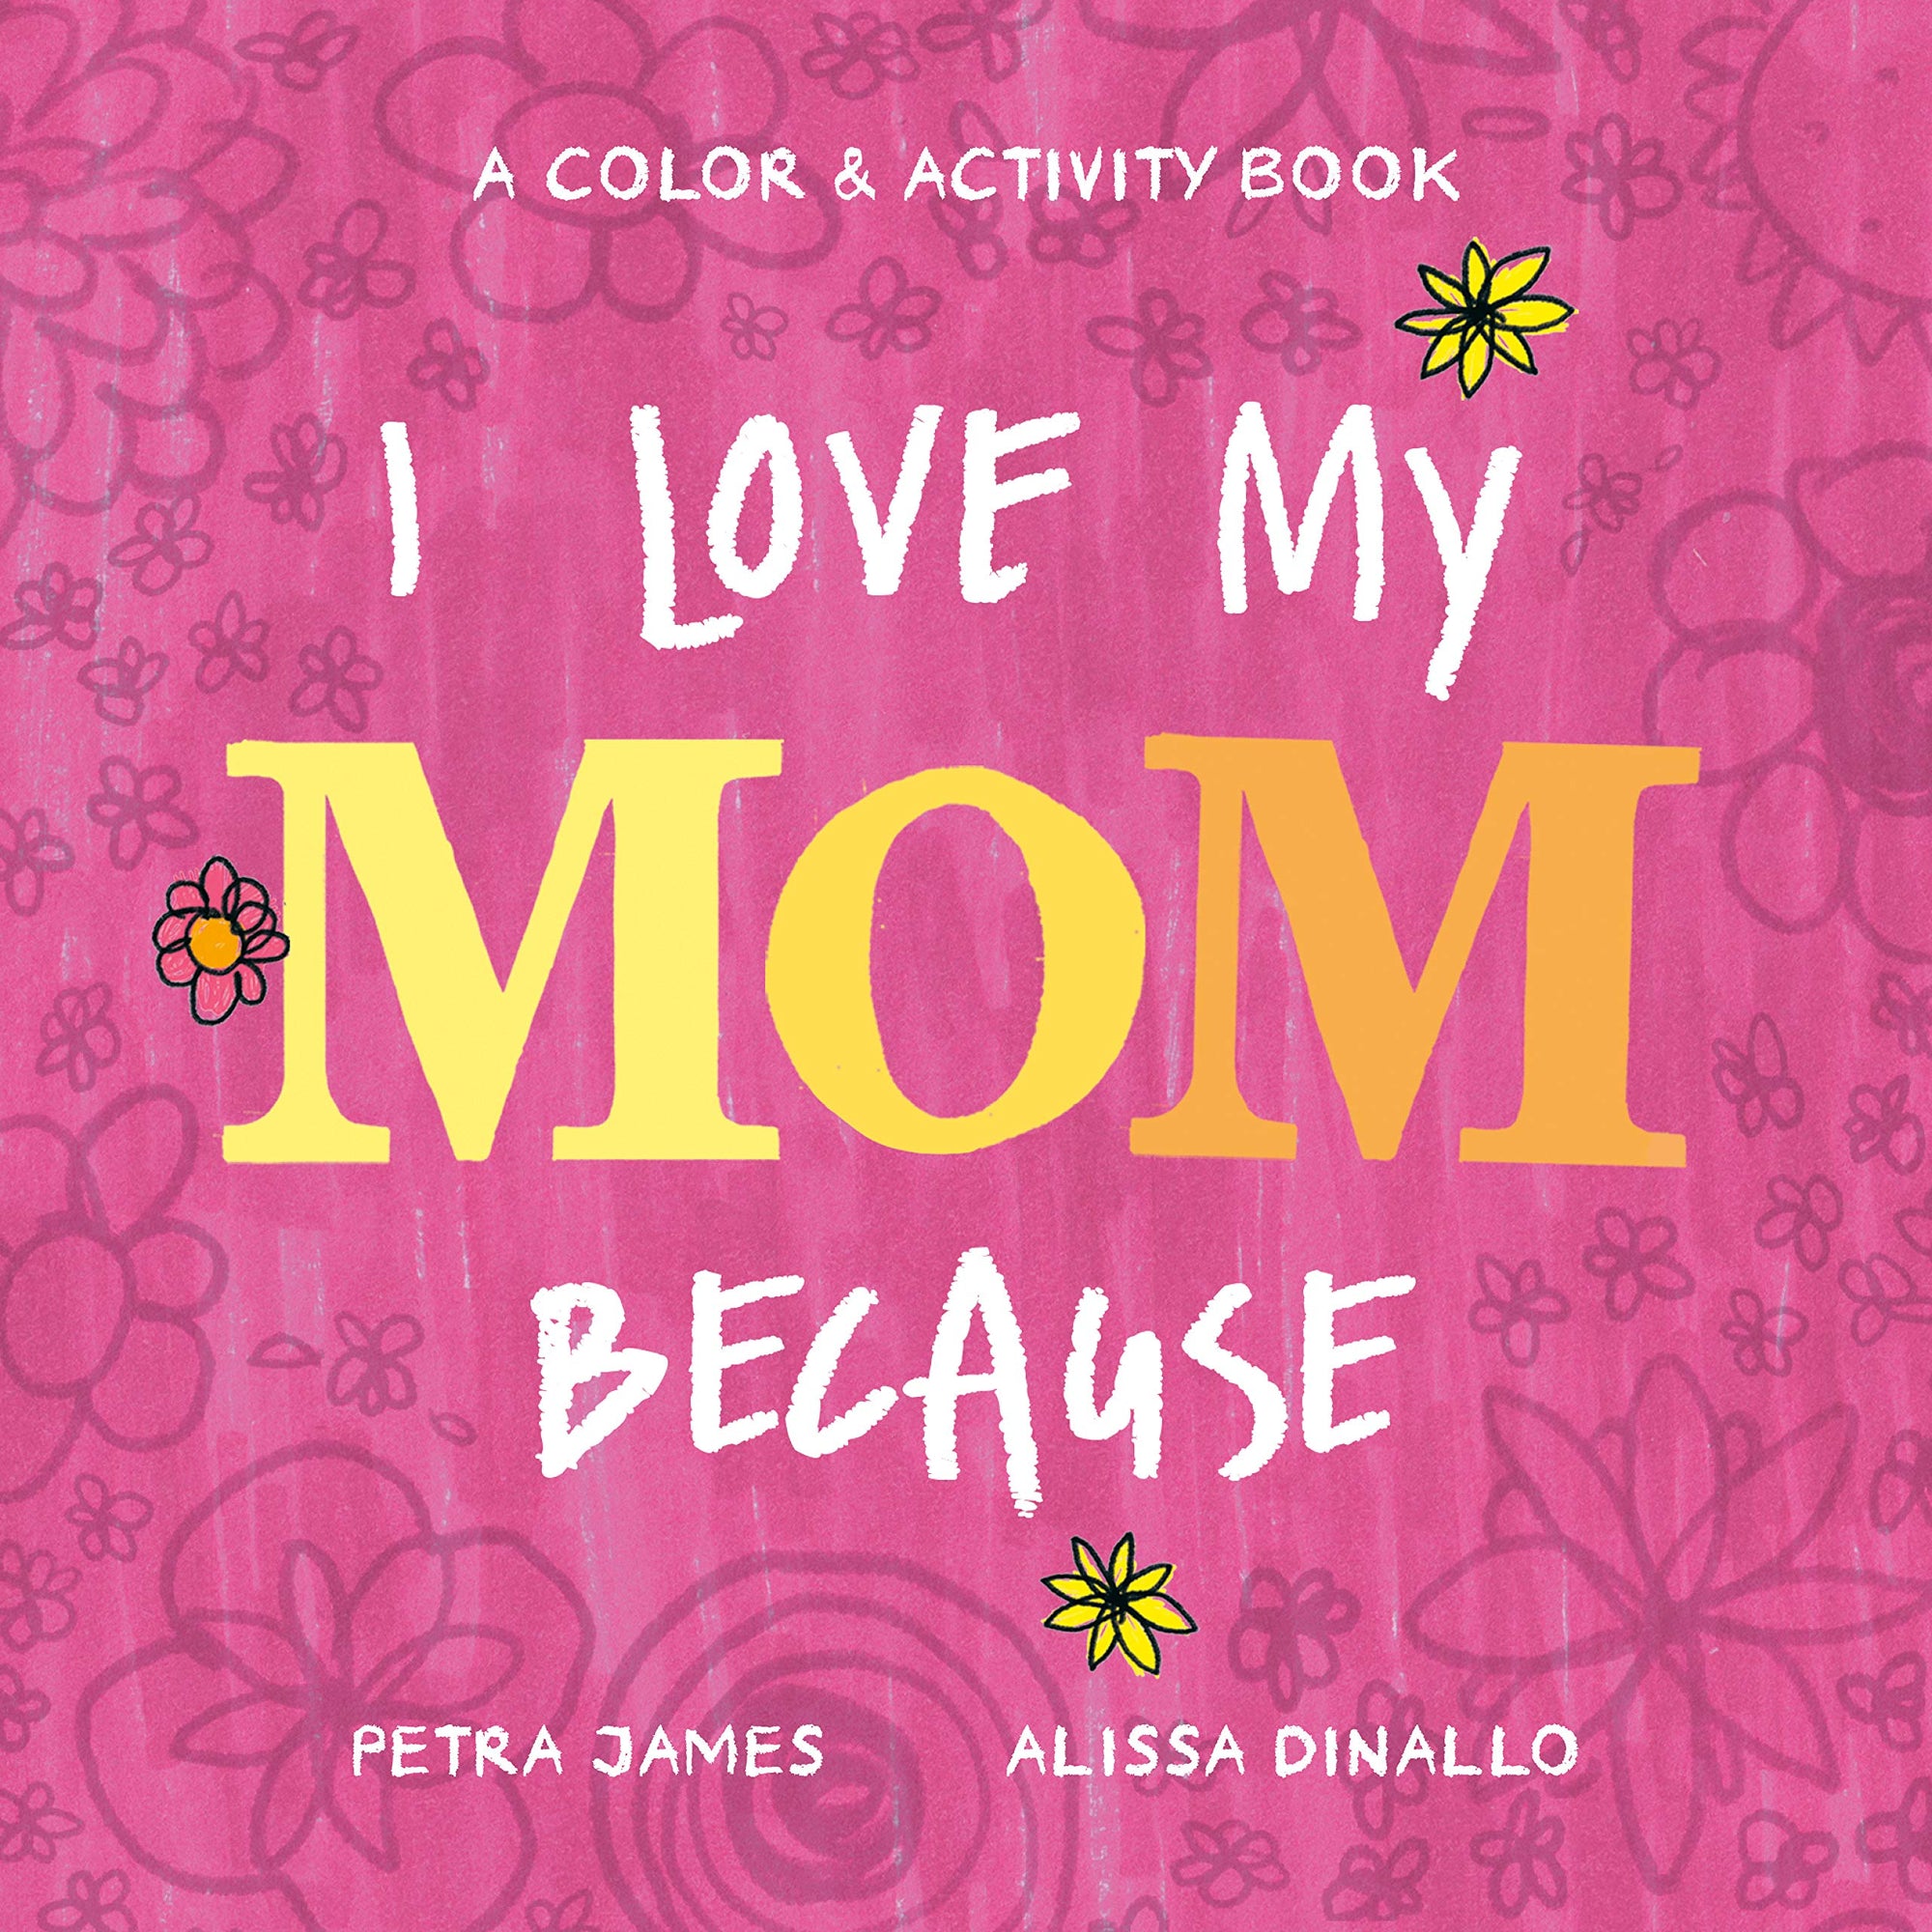 I Love My Mom Because: A Color & Activity Book